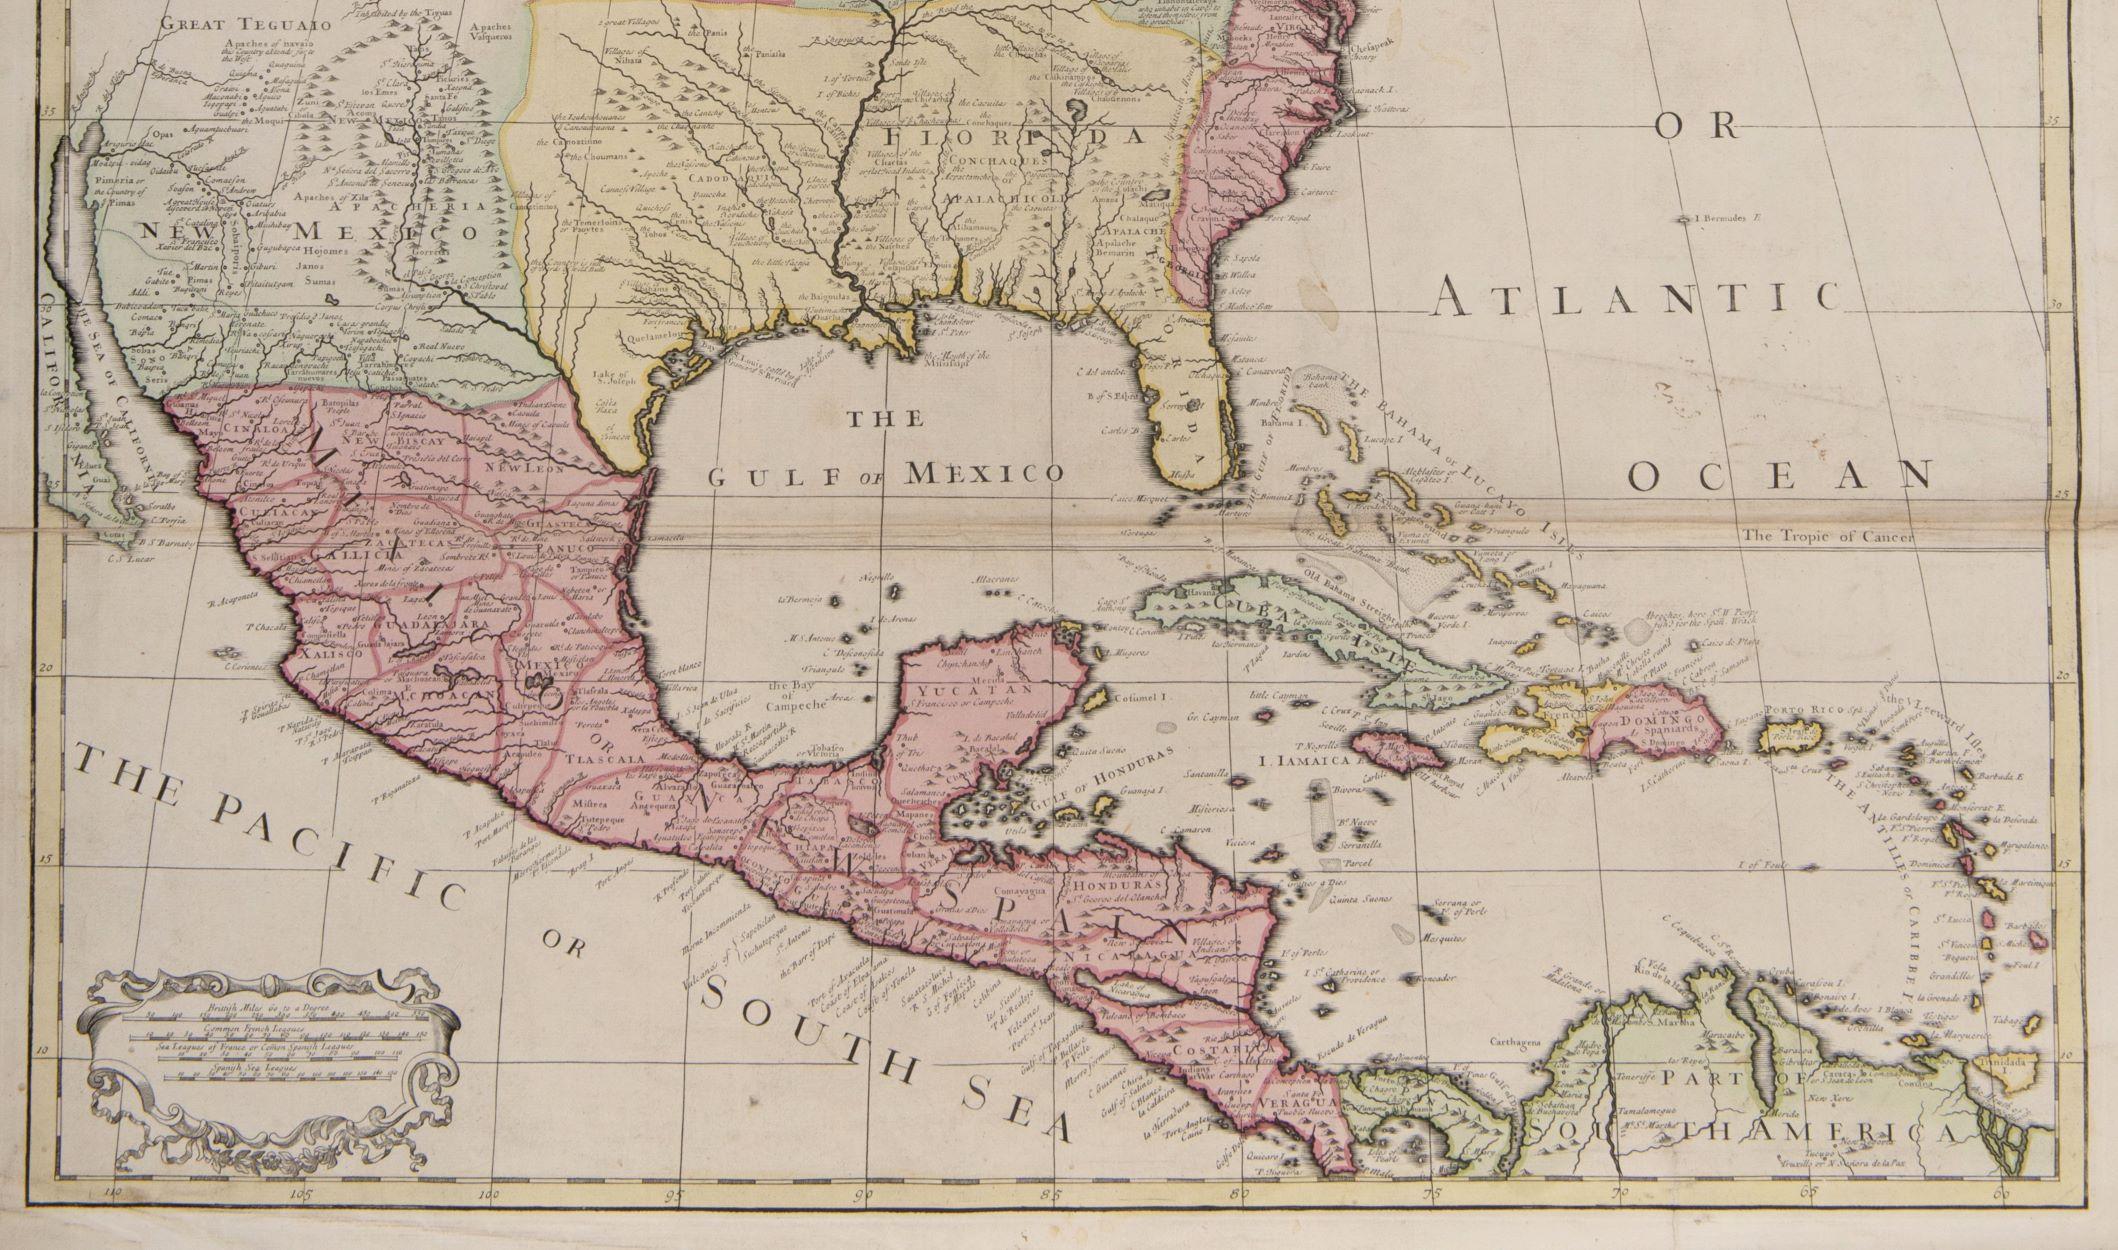 one of the earliest large-scale English maps of North America
SENEX, John.
North America  Corrected from the Observations Communicated to the Royal Society at London, and the Royal Academy at Paris. By John Senex F.R.S. 1710.  To the Honorable